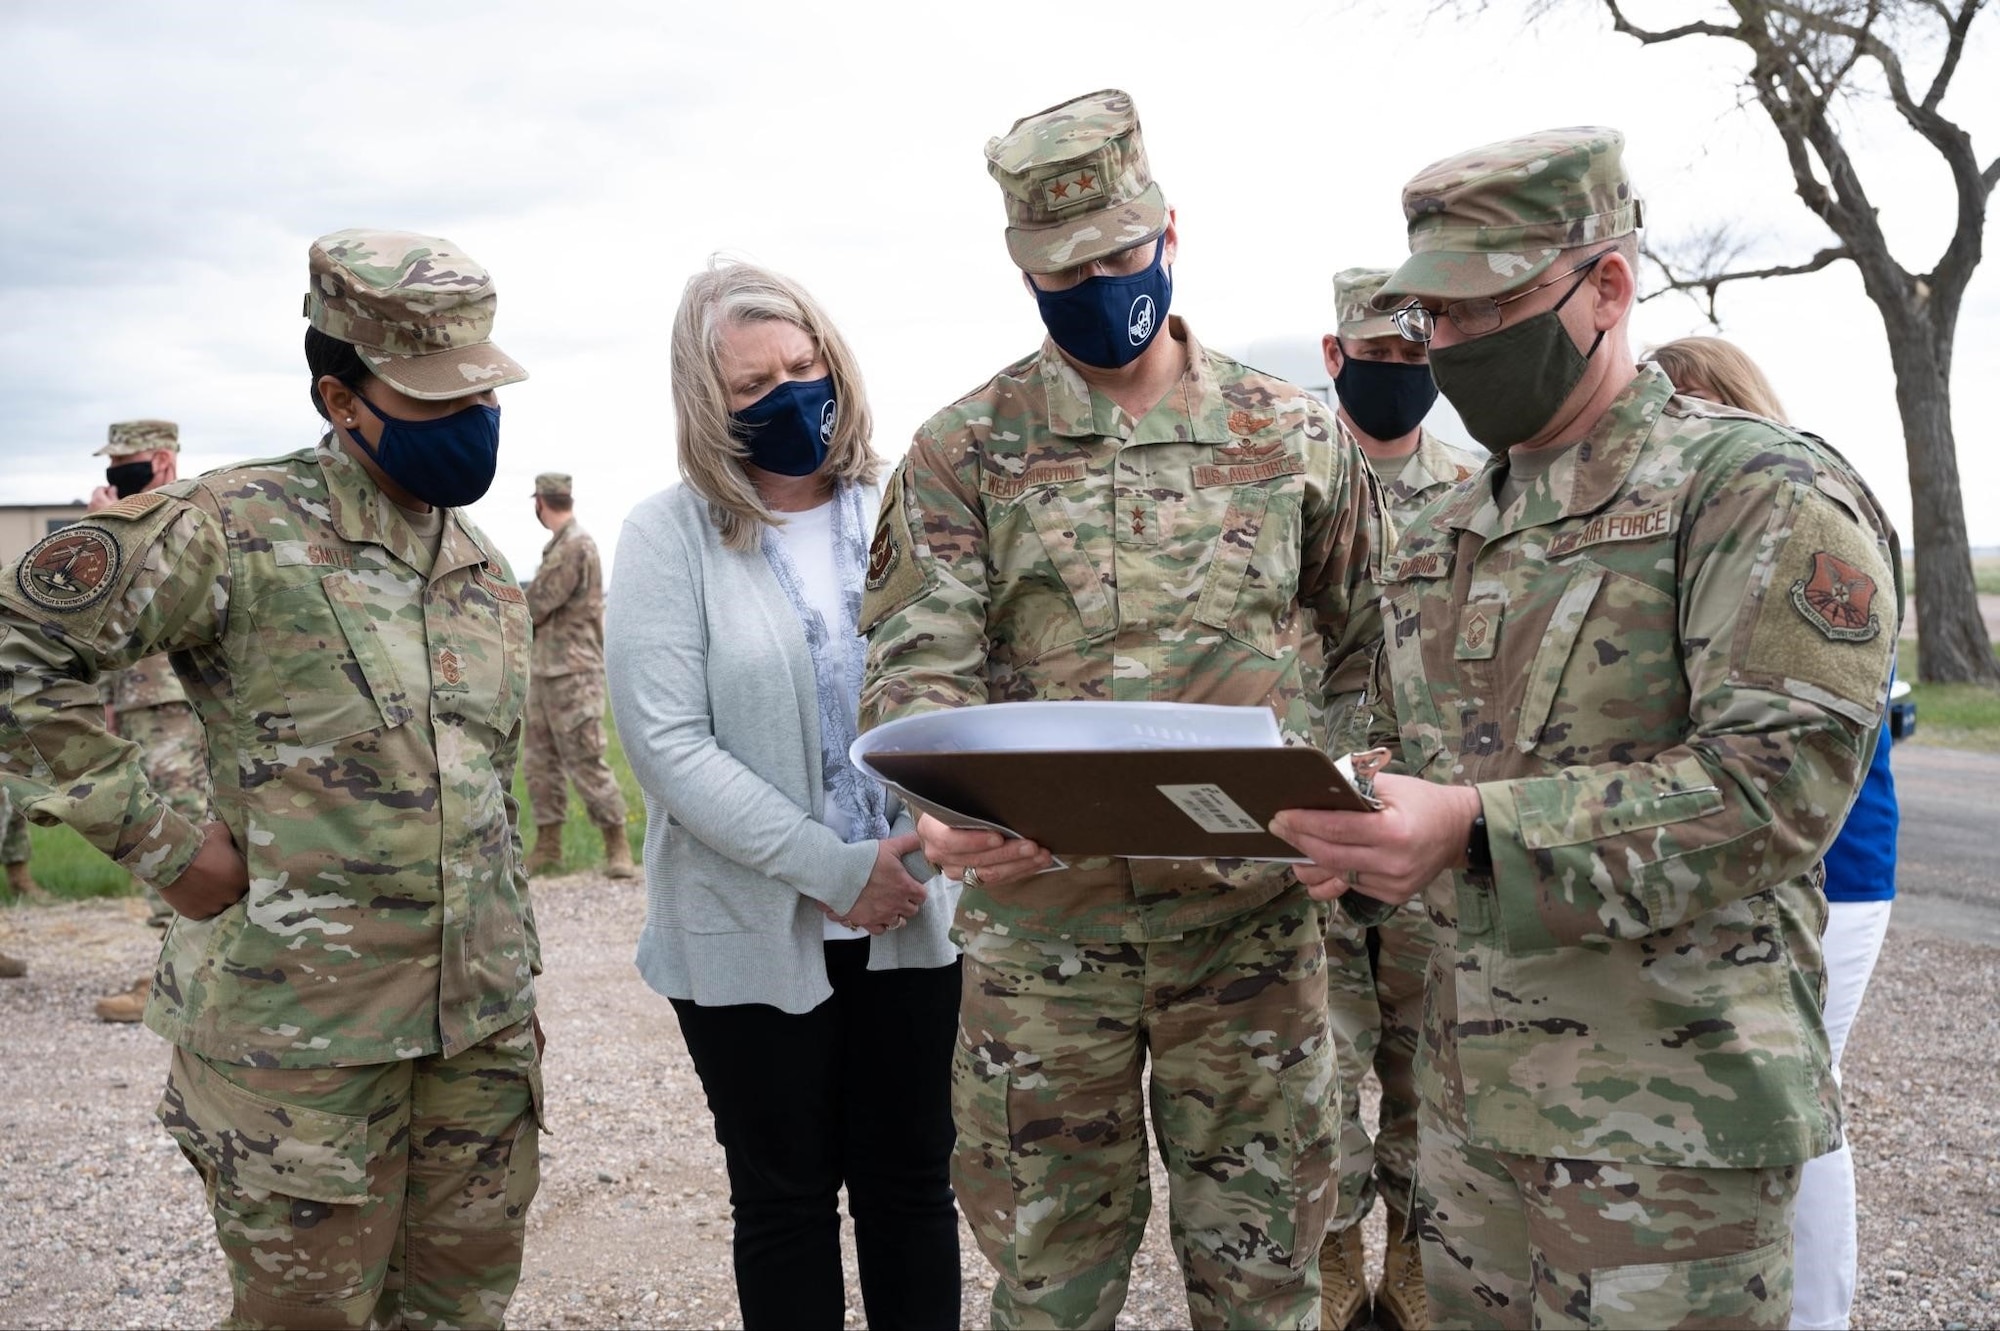 Maj. Gen. Mark Weatherington, 8th Air Force and Joint-Global Strike Operations Center commander, second from right, and Chief Master Sgt. Melvina Smith, 8th Air Force command chief and J-GSOC senior enlisted leader, far left, look over new construction plans for Camp Lancer during their visit to Ellsworth Air Force Base, S.D., May 4, 2021.